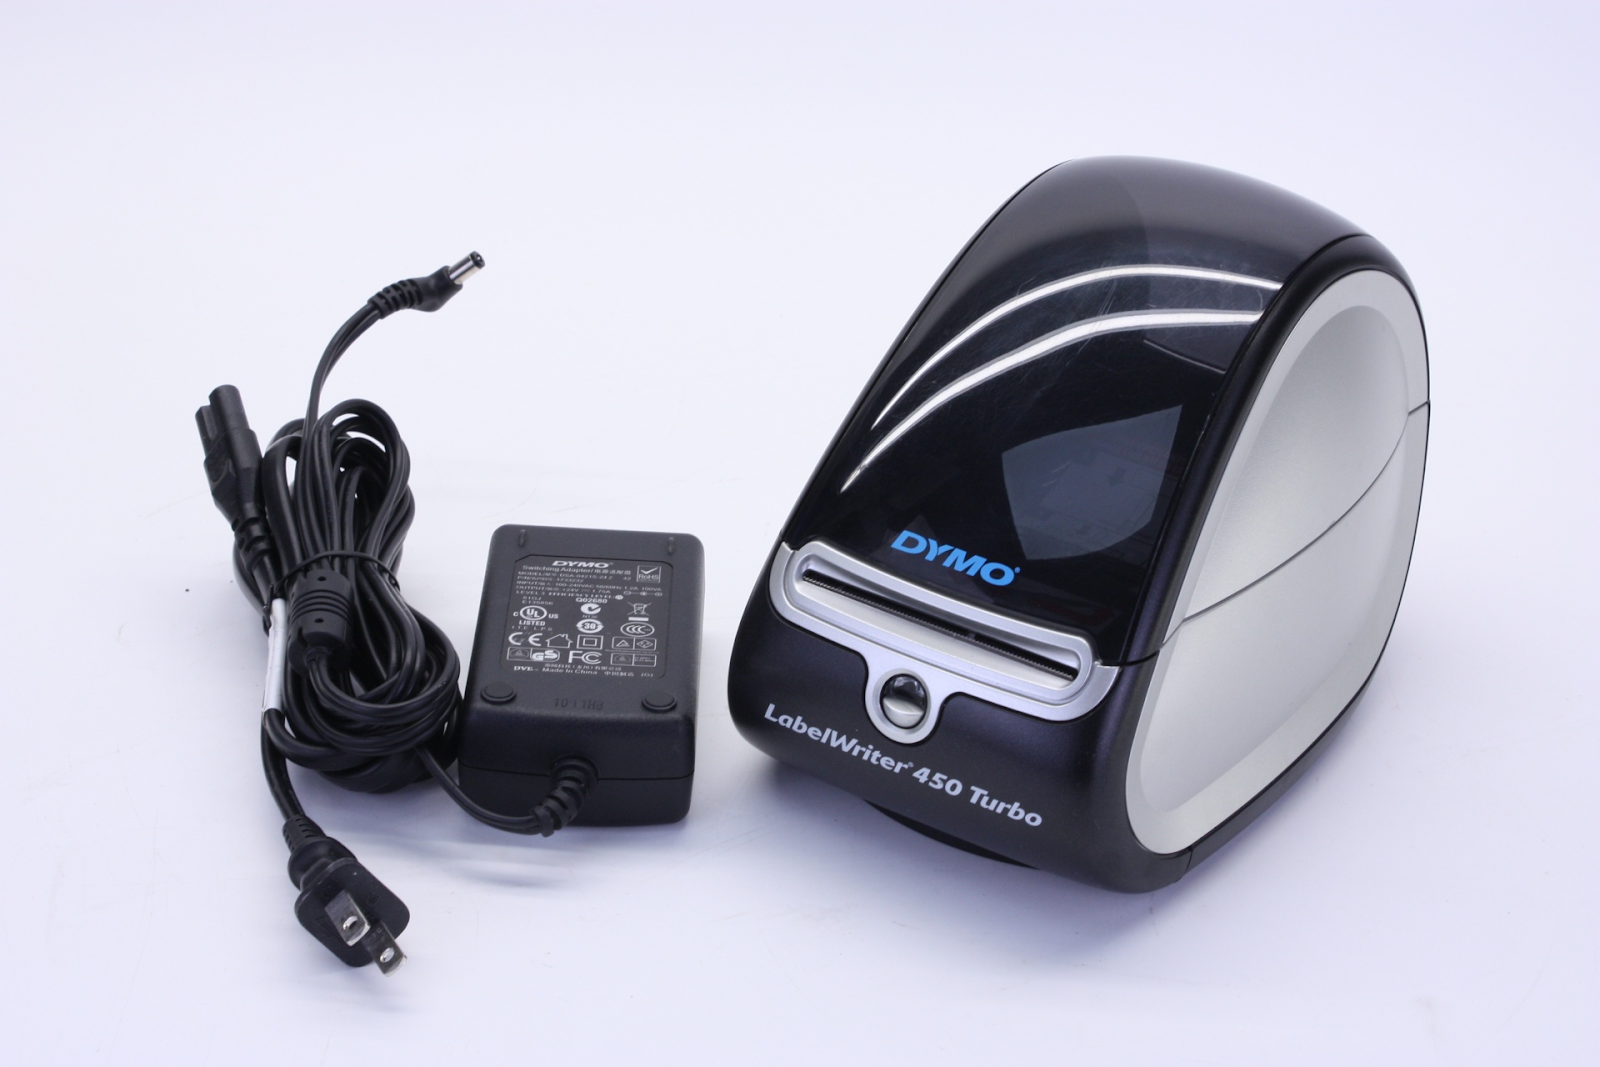 The Dymo 1750283 Label Printer Review